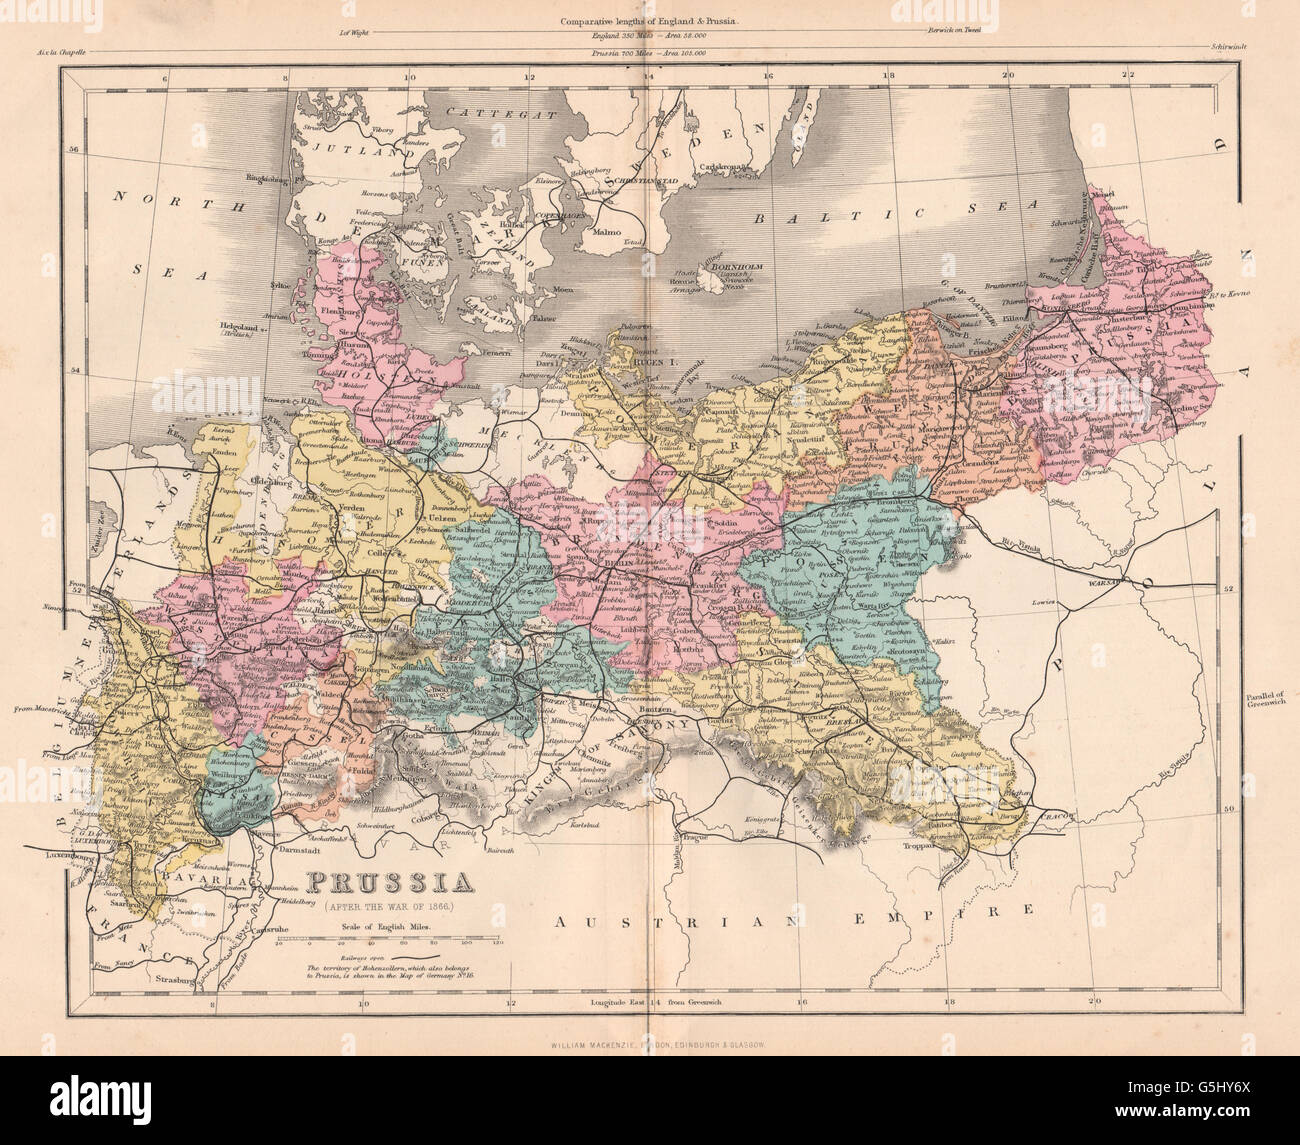 FRANCO-PRUSSIAN WAR: Prussia (After the war of 1866) , 1875 antique map Stock Photo